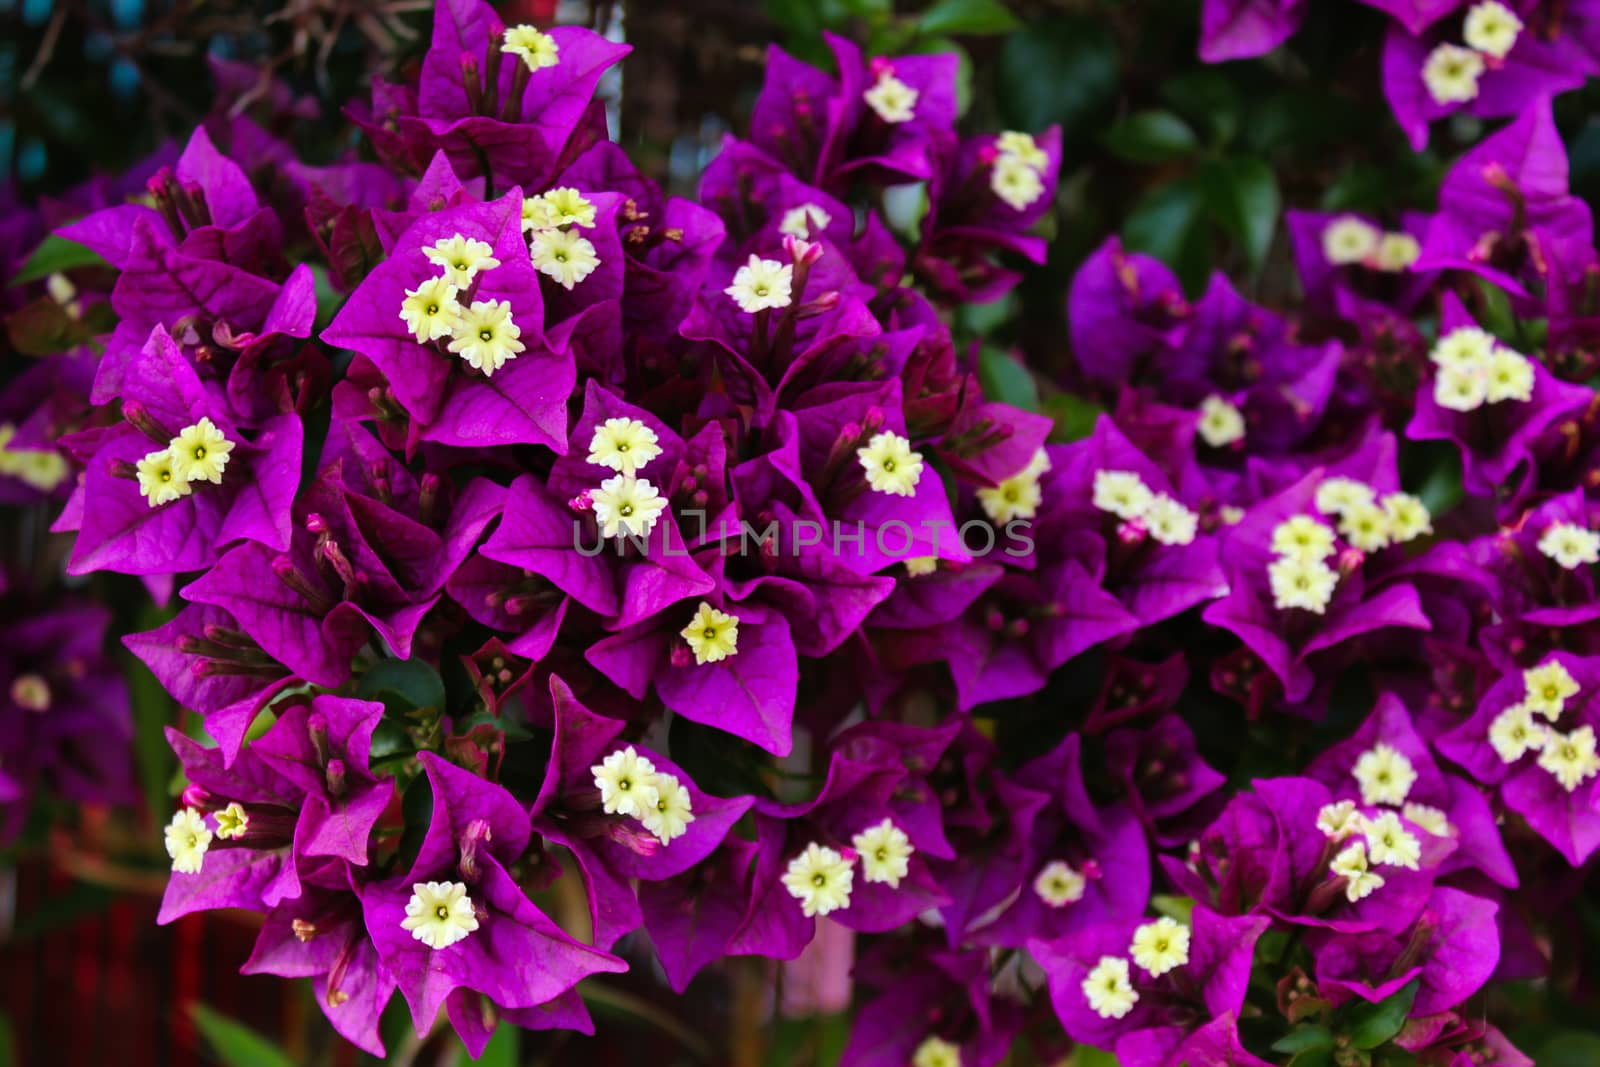 Bunch of purple and white flowers of Great bougainvillea, Bougainvillea spectabilis in Portugal. Beja, Portugal.